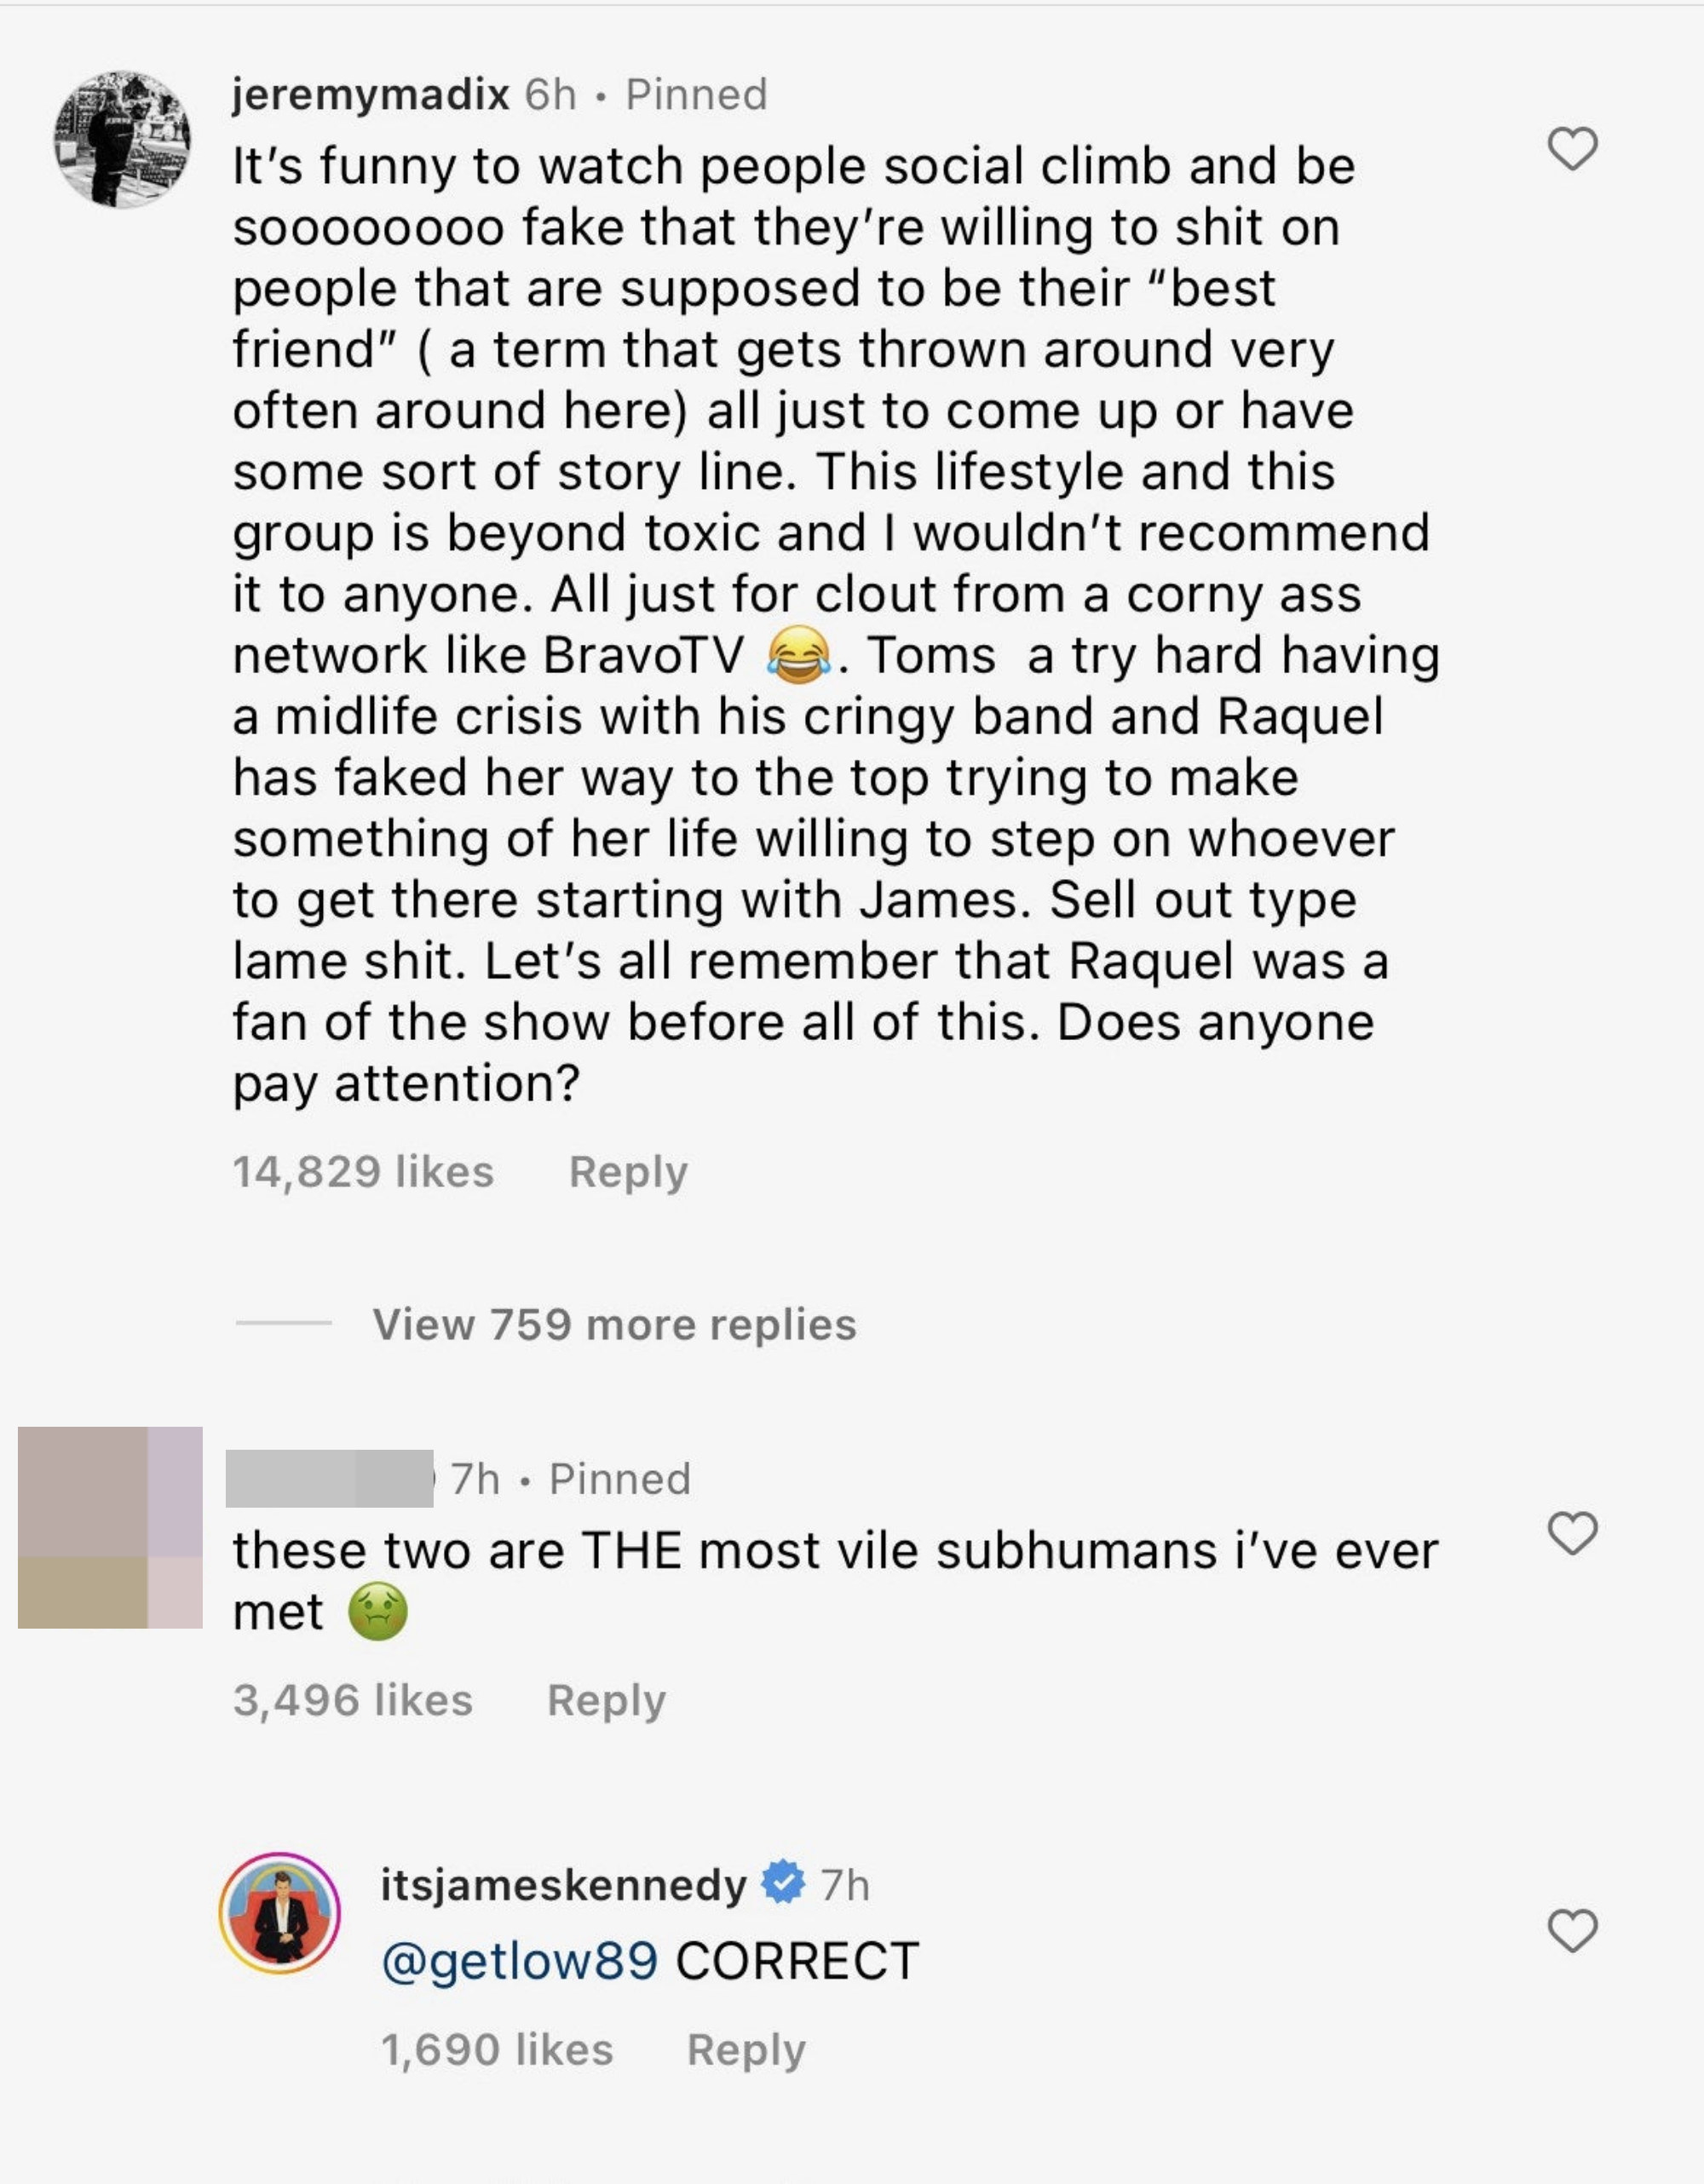 James responds to a comment calling Tom and Raquel the most vile subhumans by saying correct